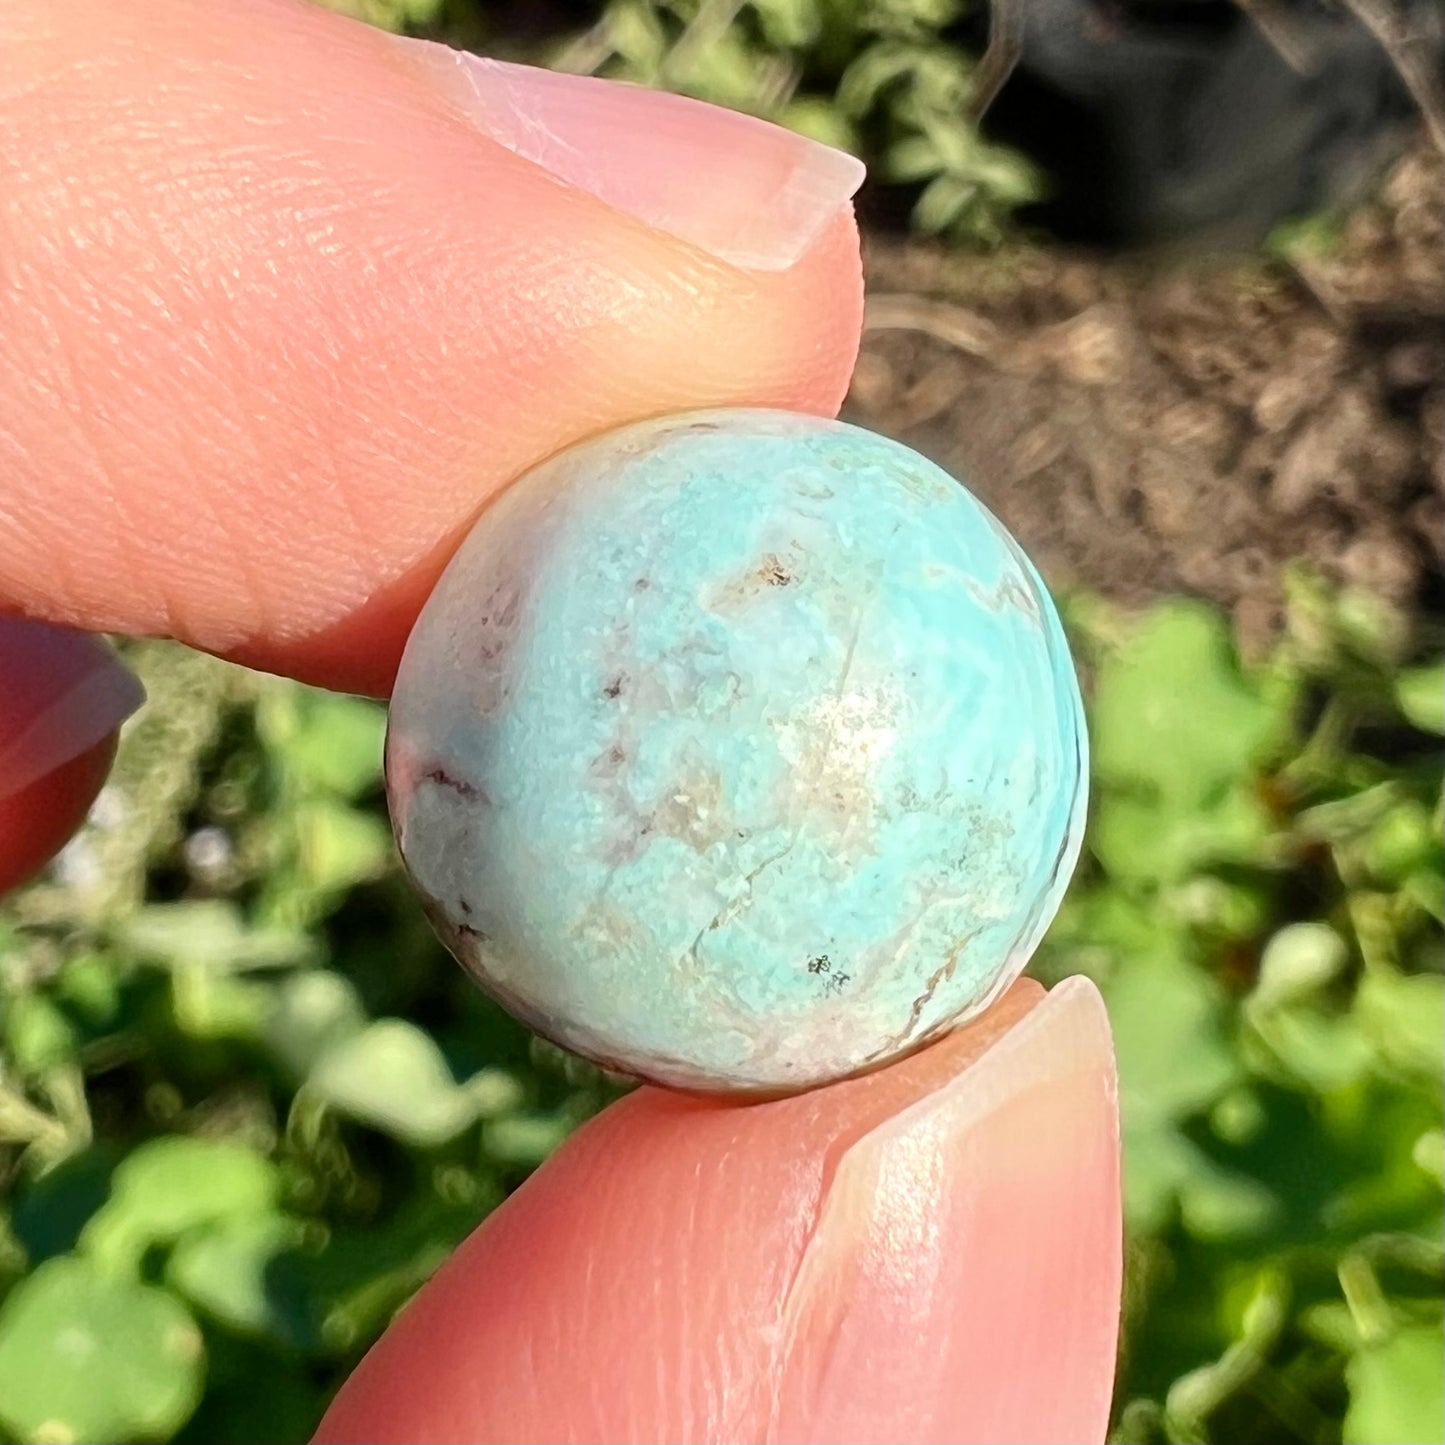 A loose, round cabochon cut Valley Blue turquoise stone.